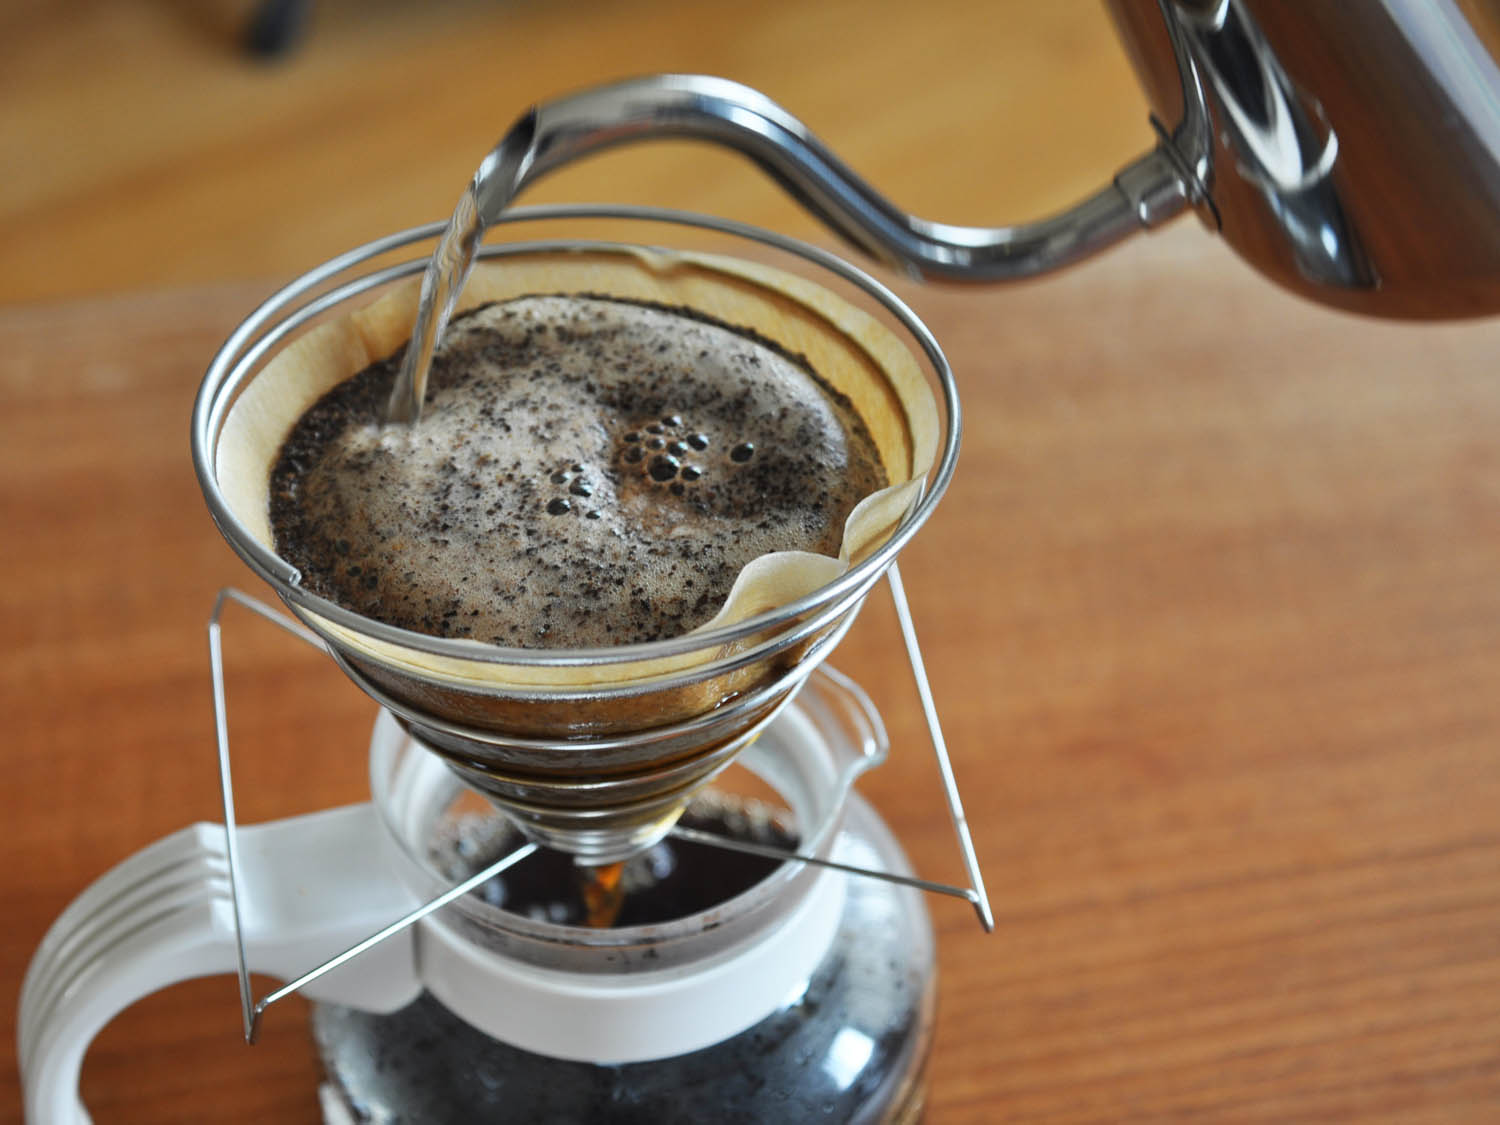 [hypothetical hand-brewing coffee] will the exhaust of the filter cup affect the flow rate?